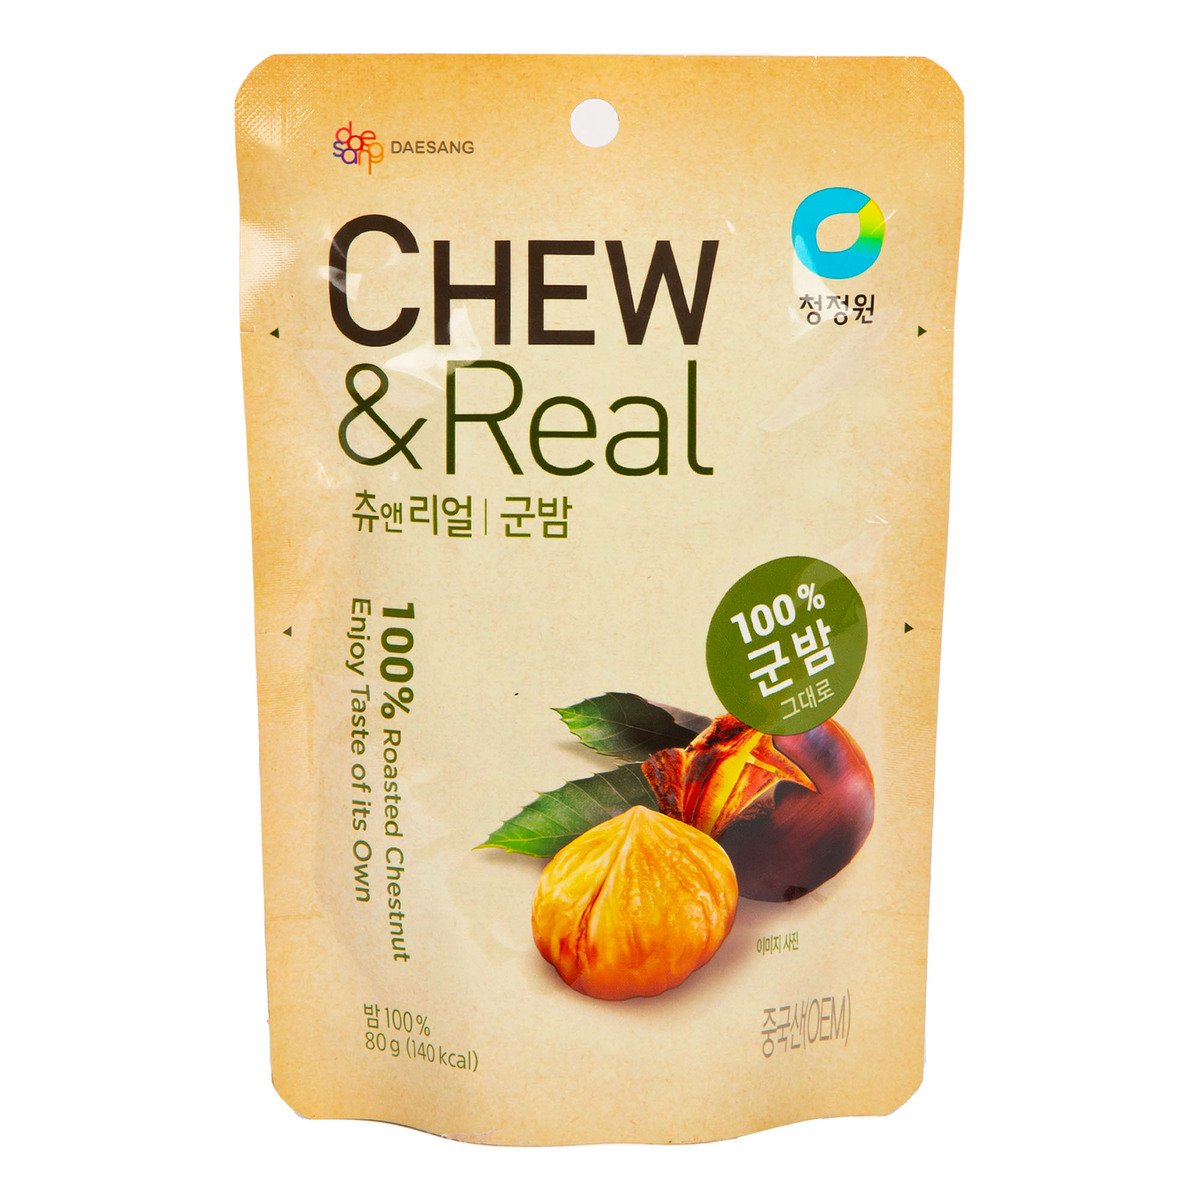 Buy OFood Chew & Real Roasted Chest Nut 80 g Online at Best Price | Other Ethnic Food | Lulu UAE in UAE